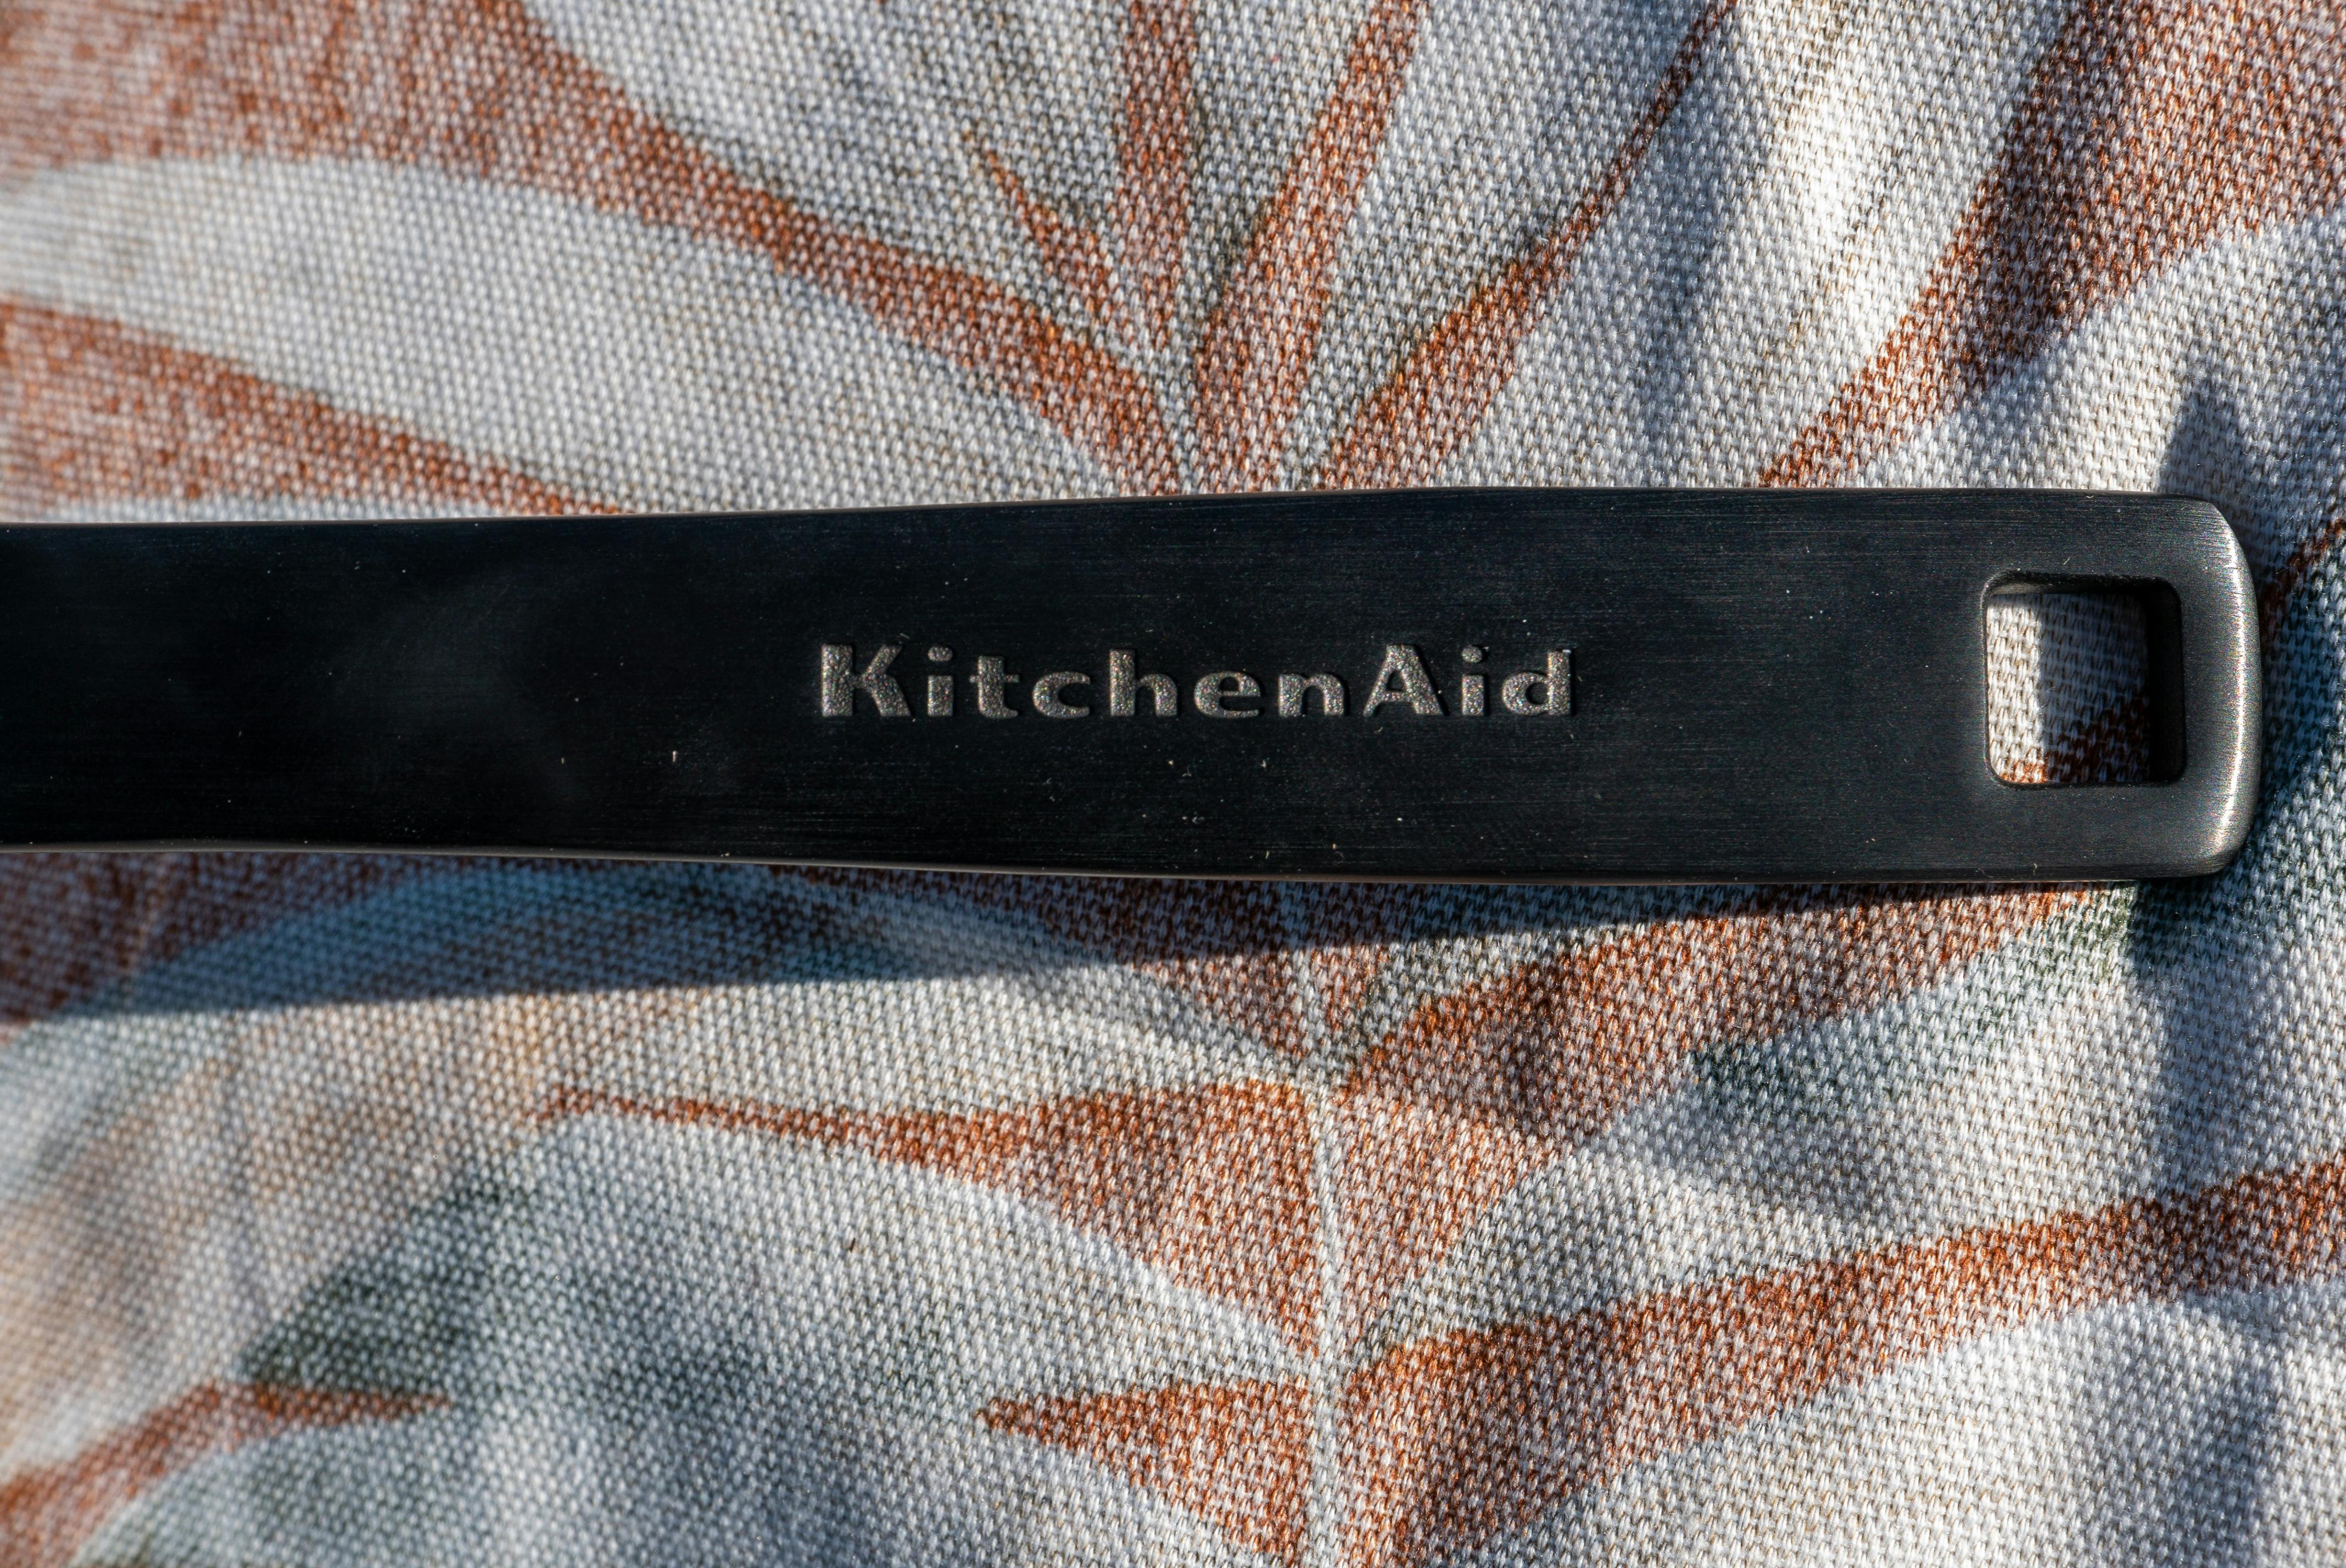 The loop for handing the KitchenAid 5-Ply Clad Stainless Steel Induction Frying Pan, 10-Inch, Polished Stainless Steel.